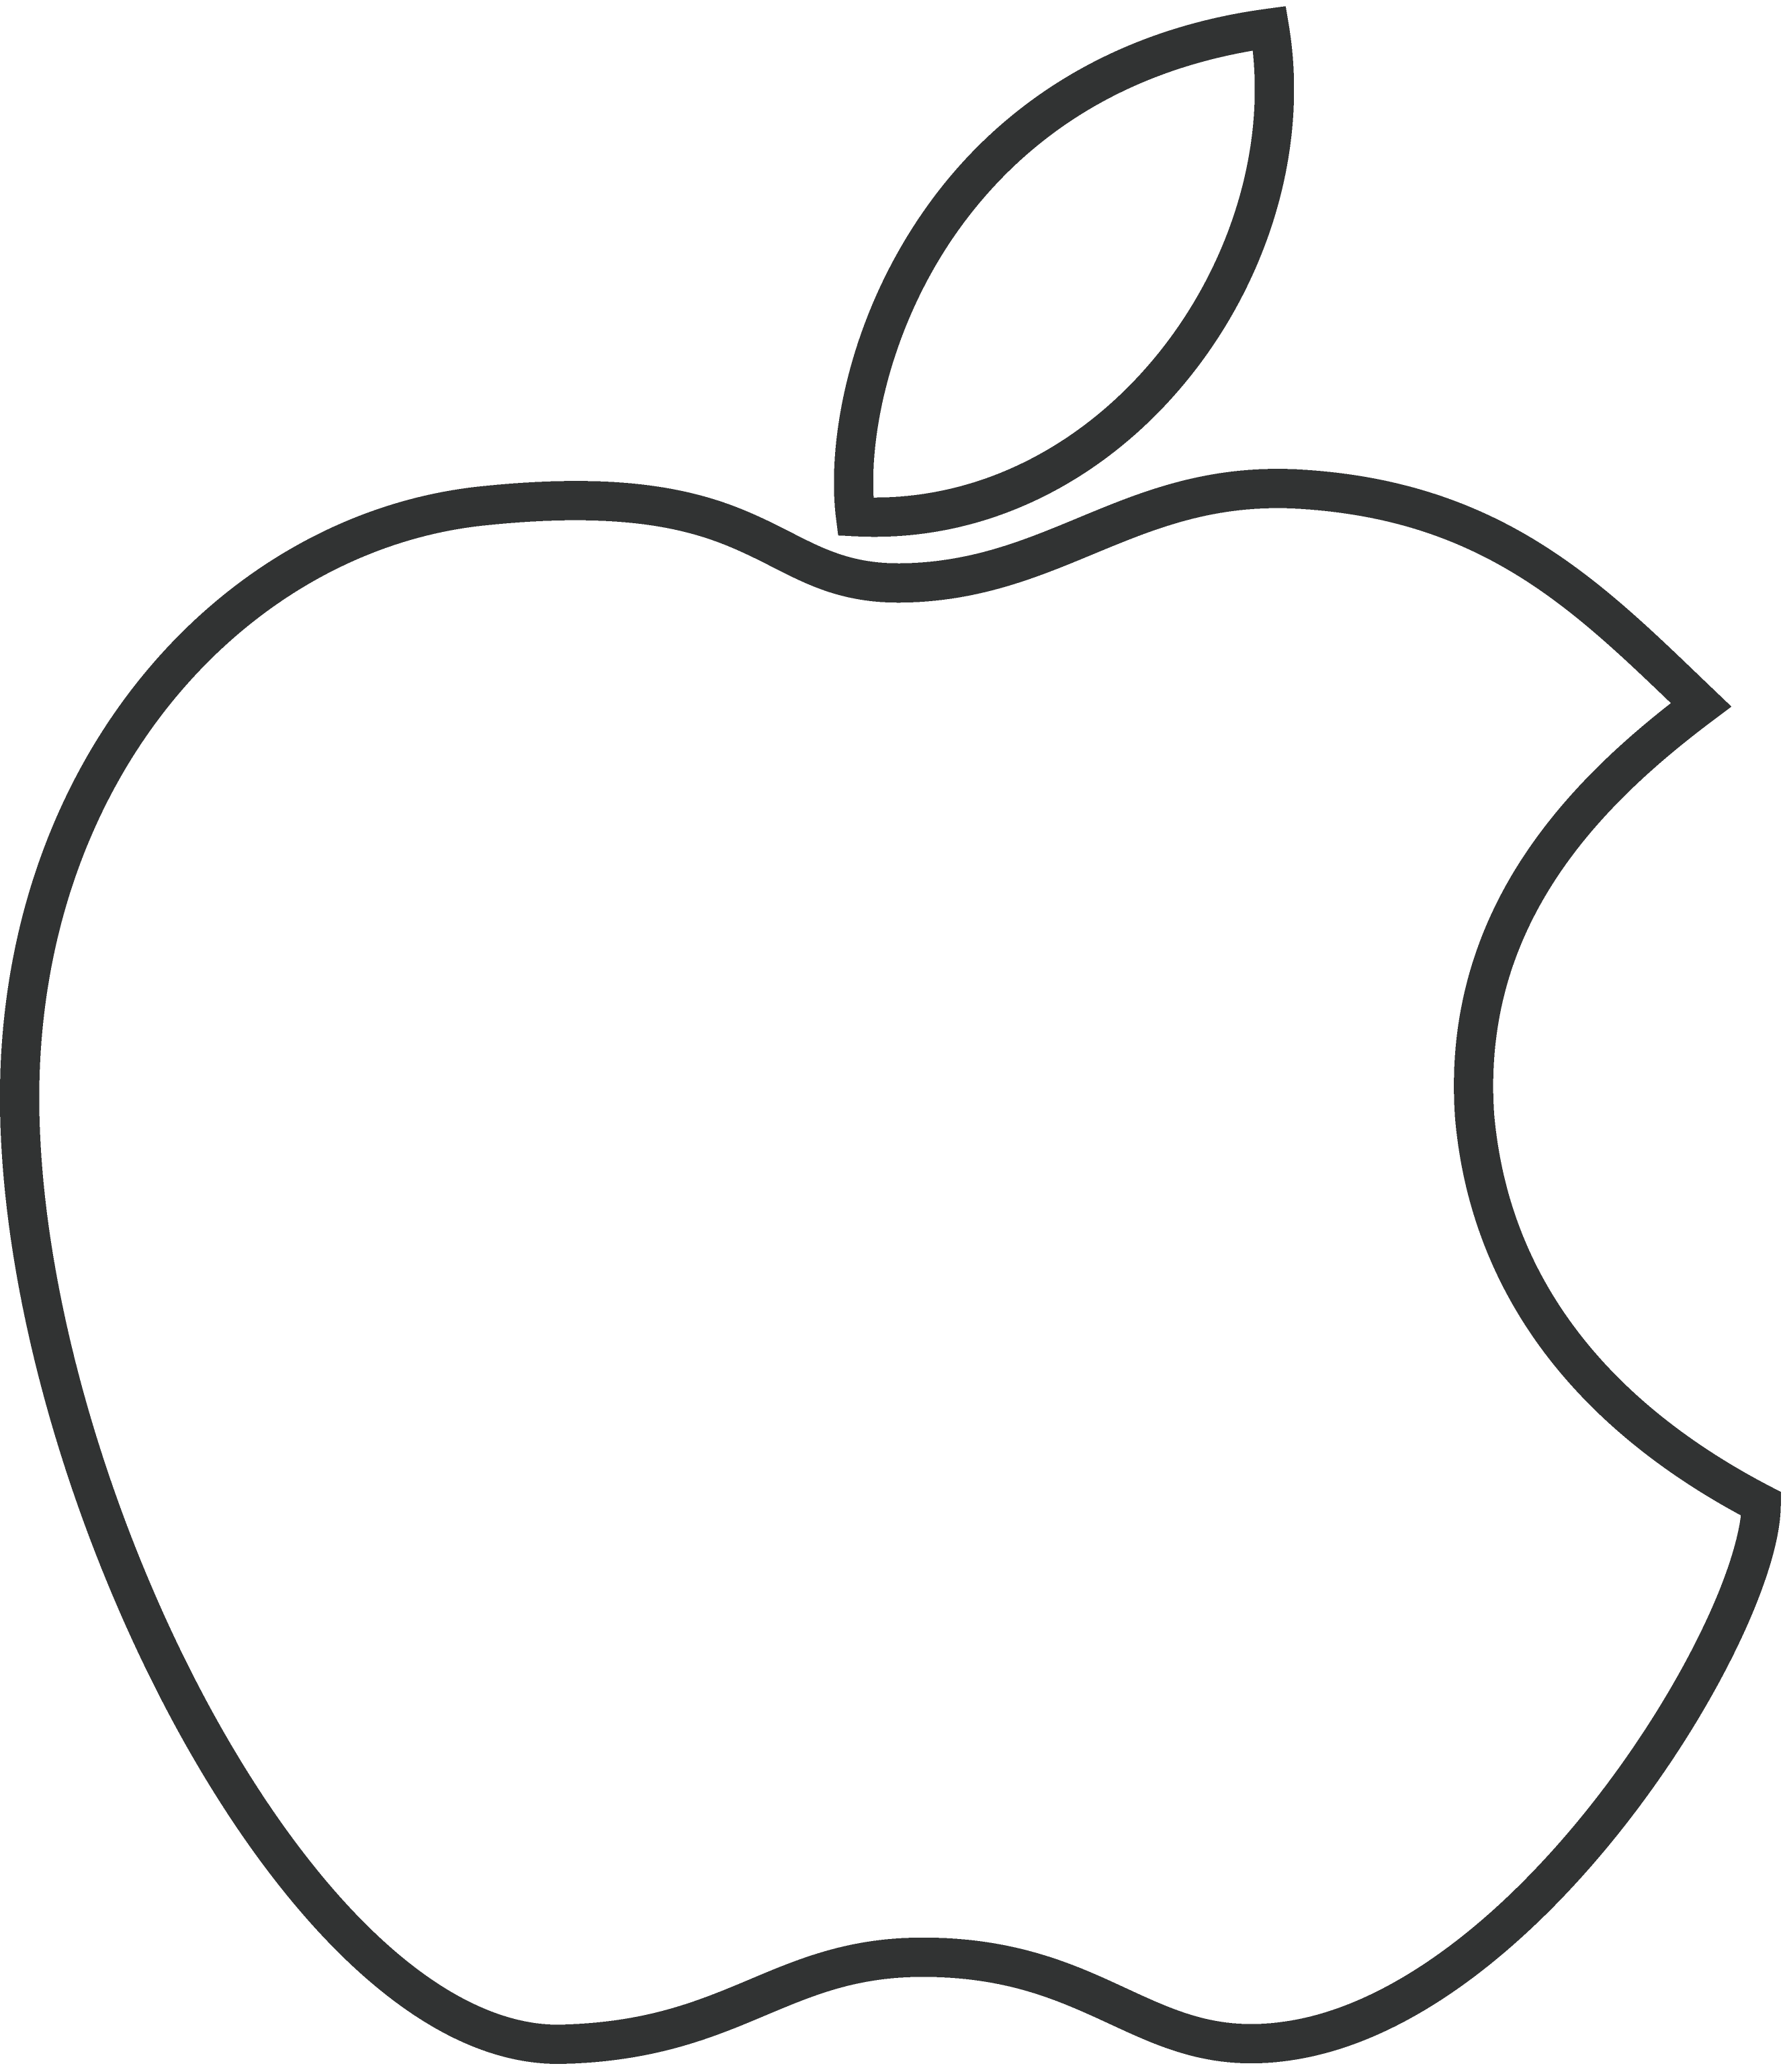 Download Apple System Decal Iphone Maintenance Logo Hq Png Image Freepngimg